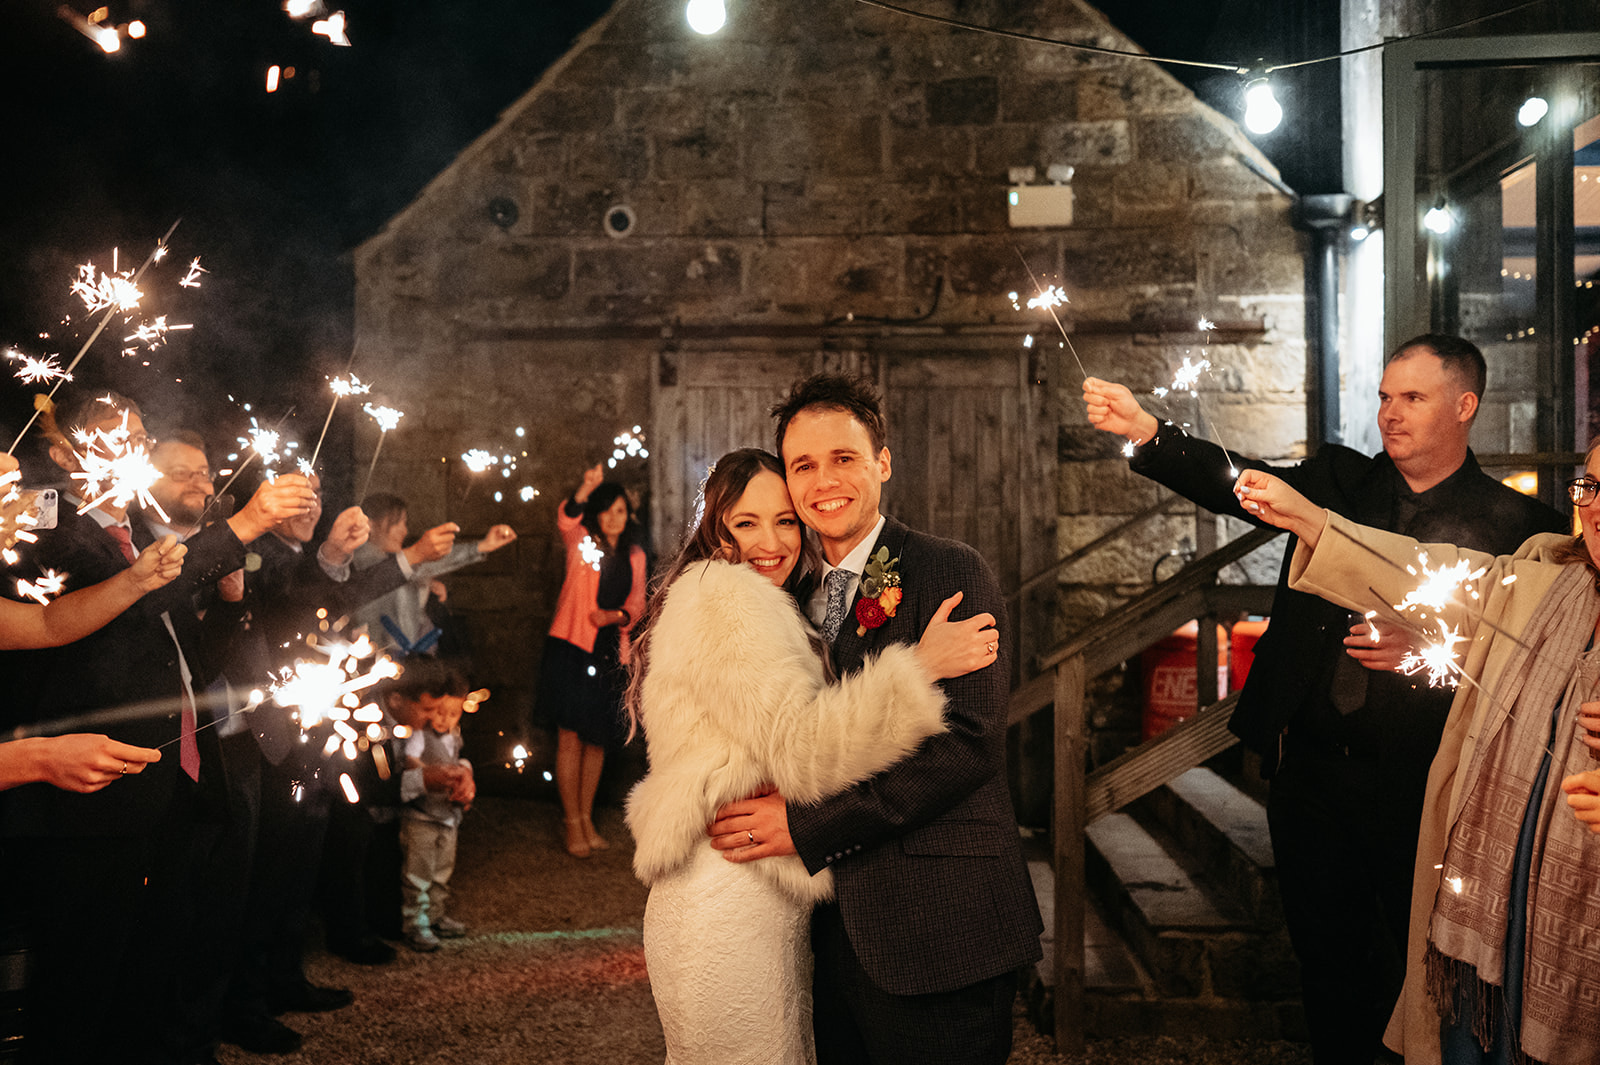 A magical moment captured with Adelle and Ric surrounded by their guests holding sparklers, creating a twinkling light